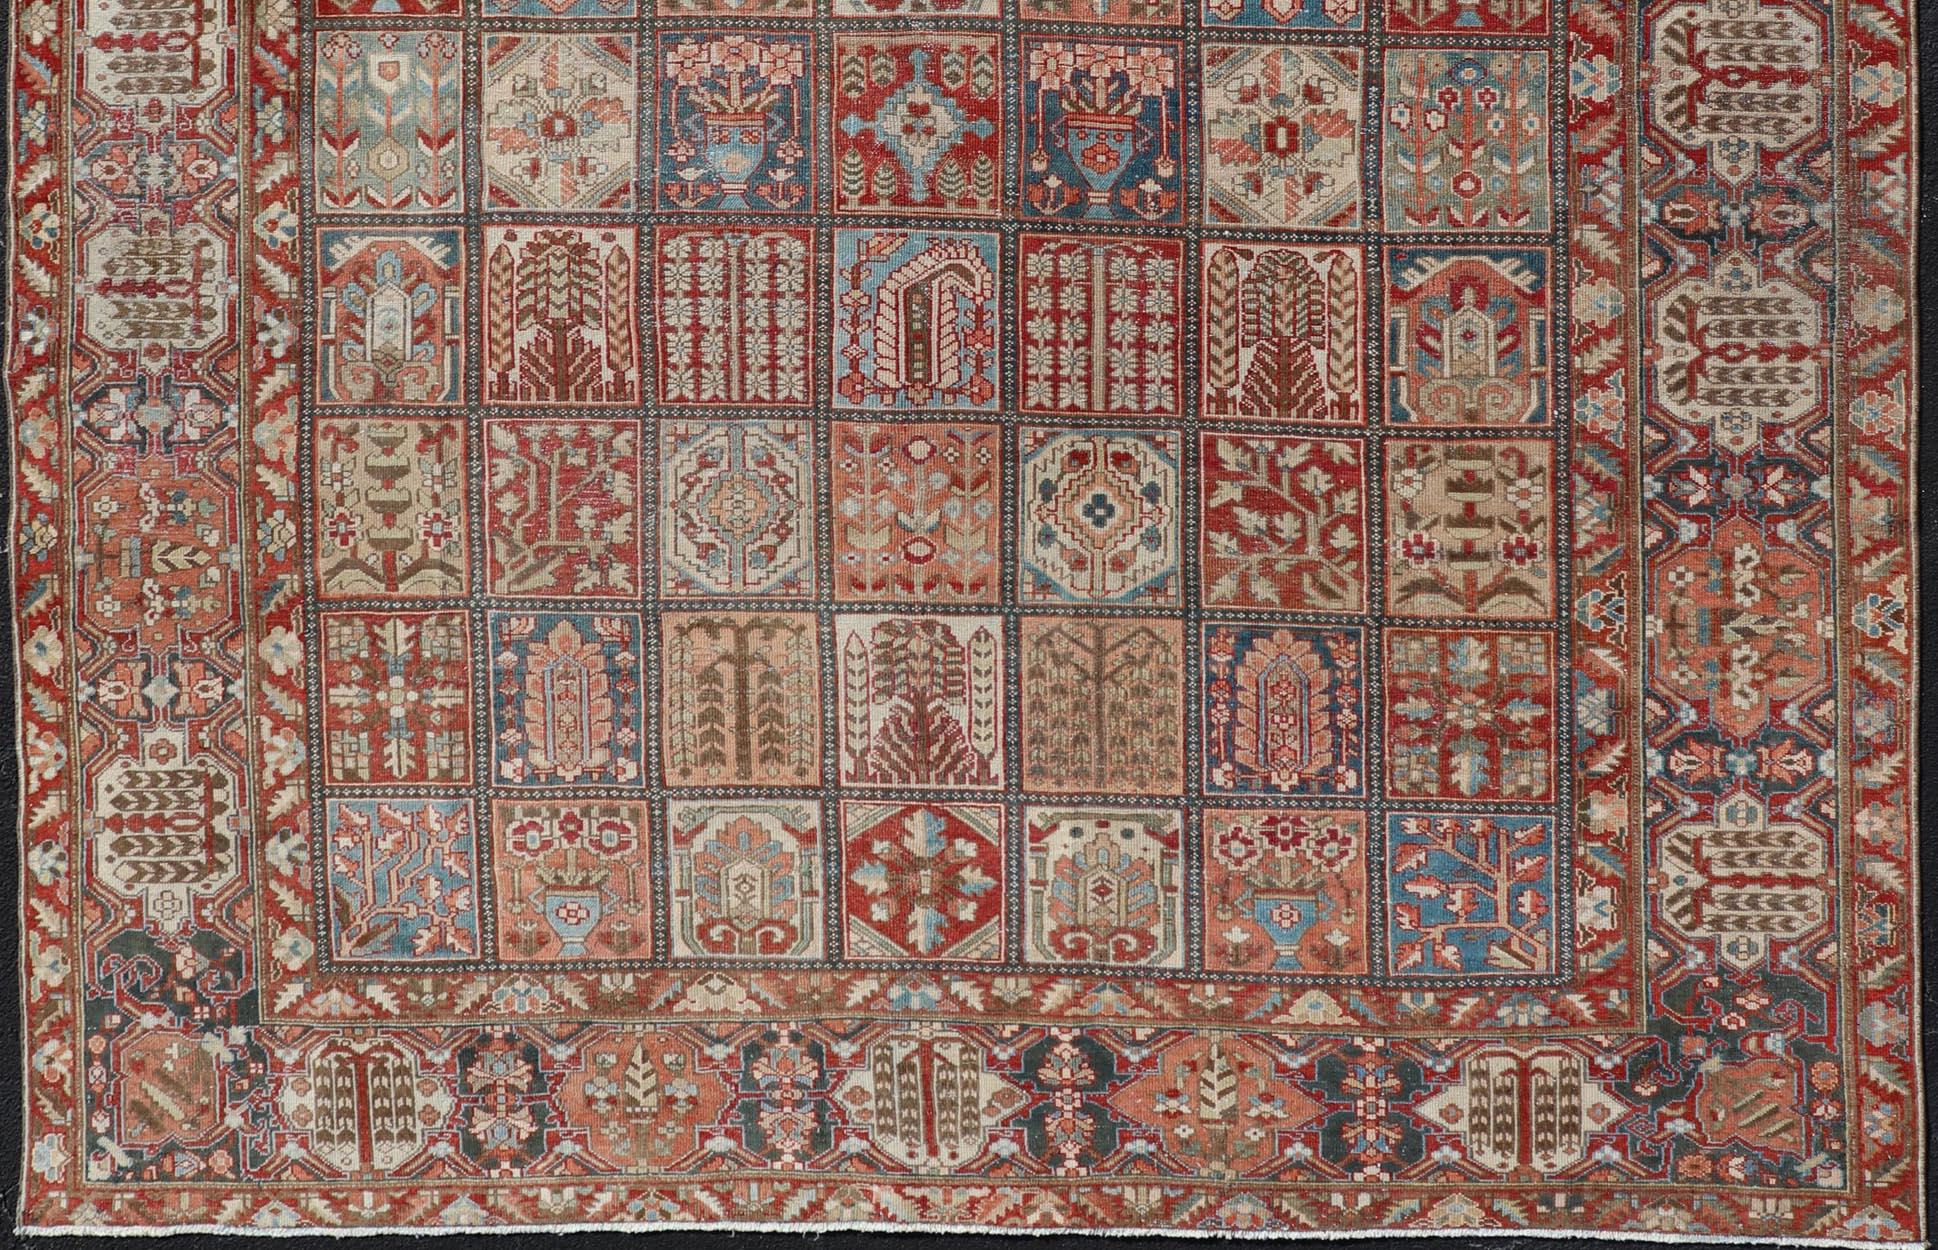 Large hand knotted Persian Bakhtiari rug with all-over garden design. Keivan Woven Arts / rug EMB-9704-P13455, country of origin / type: Iran / Bakhtiari, circa 1930
Measures: 10'9 x 11'10.
This antique Bakhtiari features a decorated all-over motifs